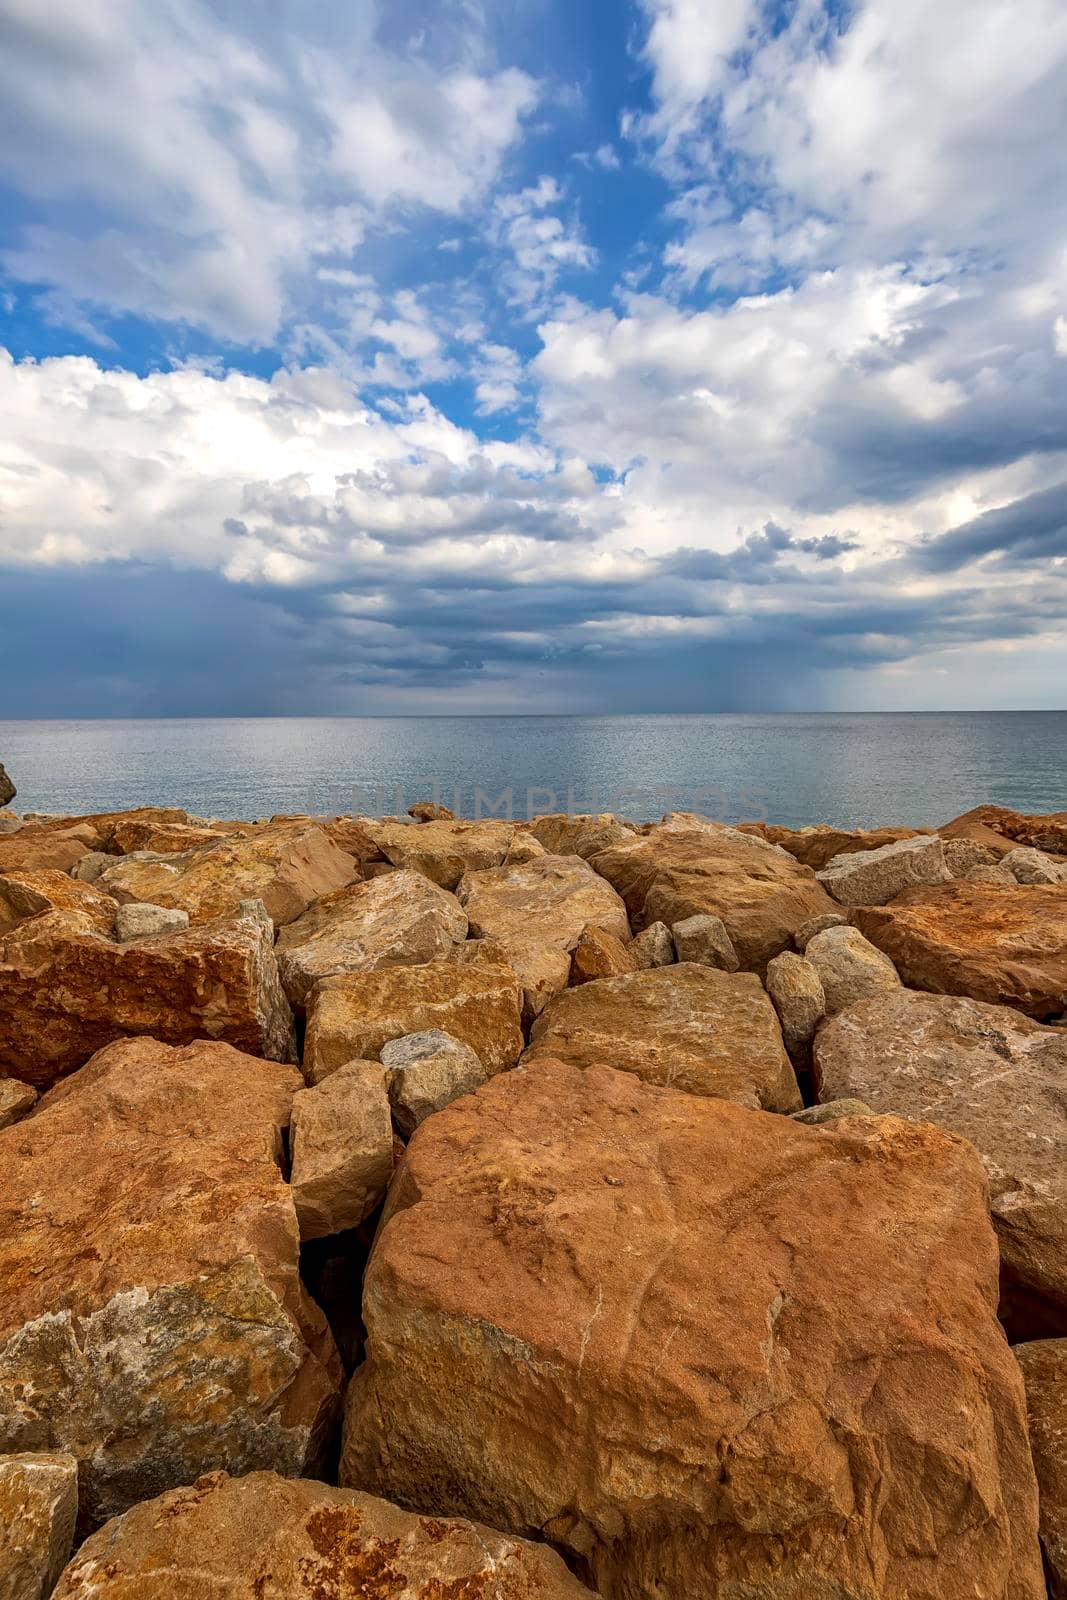 Colorful stones on a shore with fluffy clouds at the horizon. Vertical view